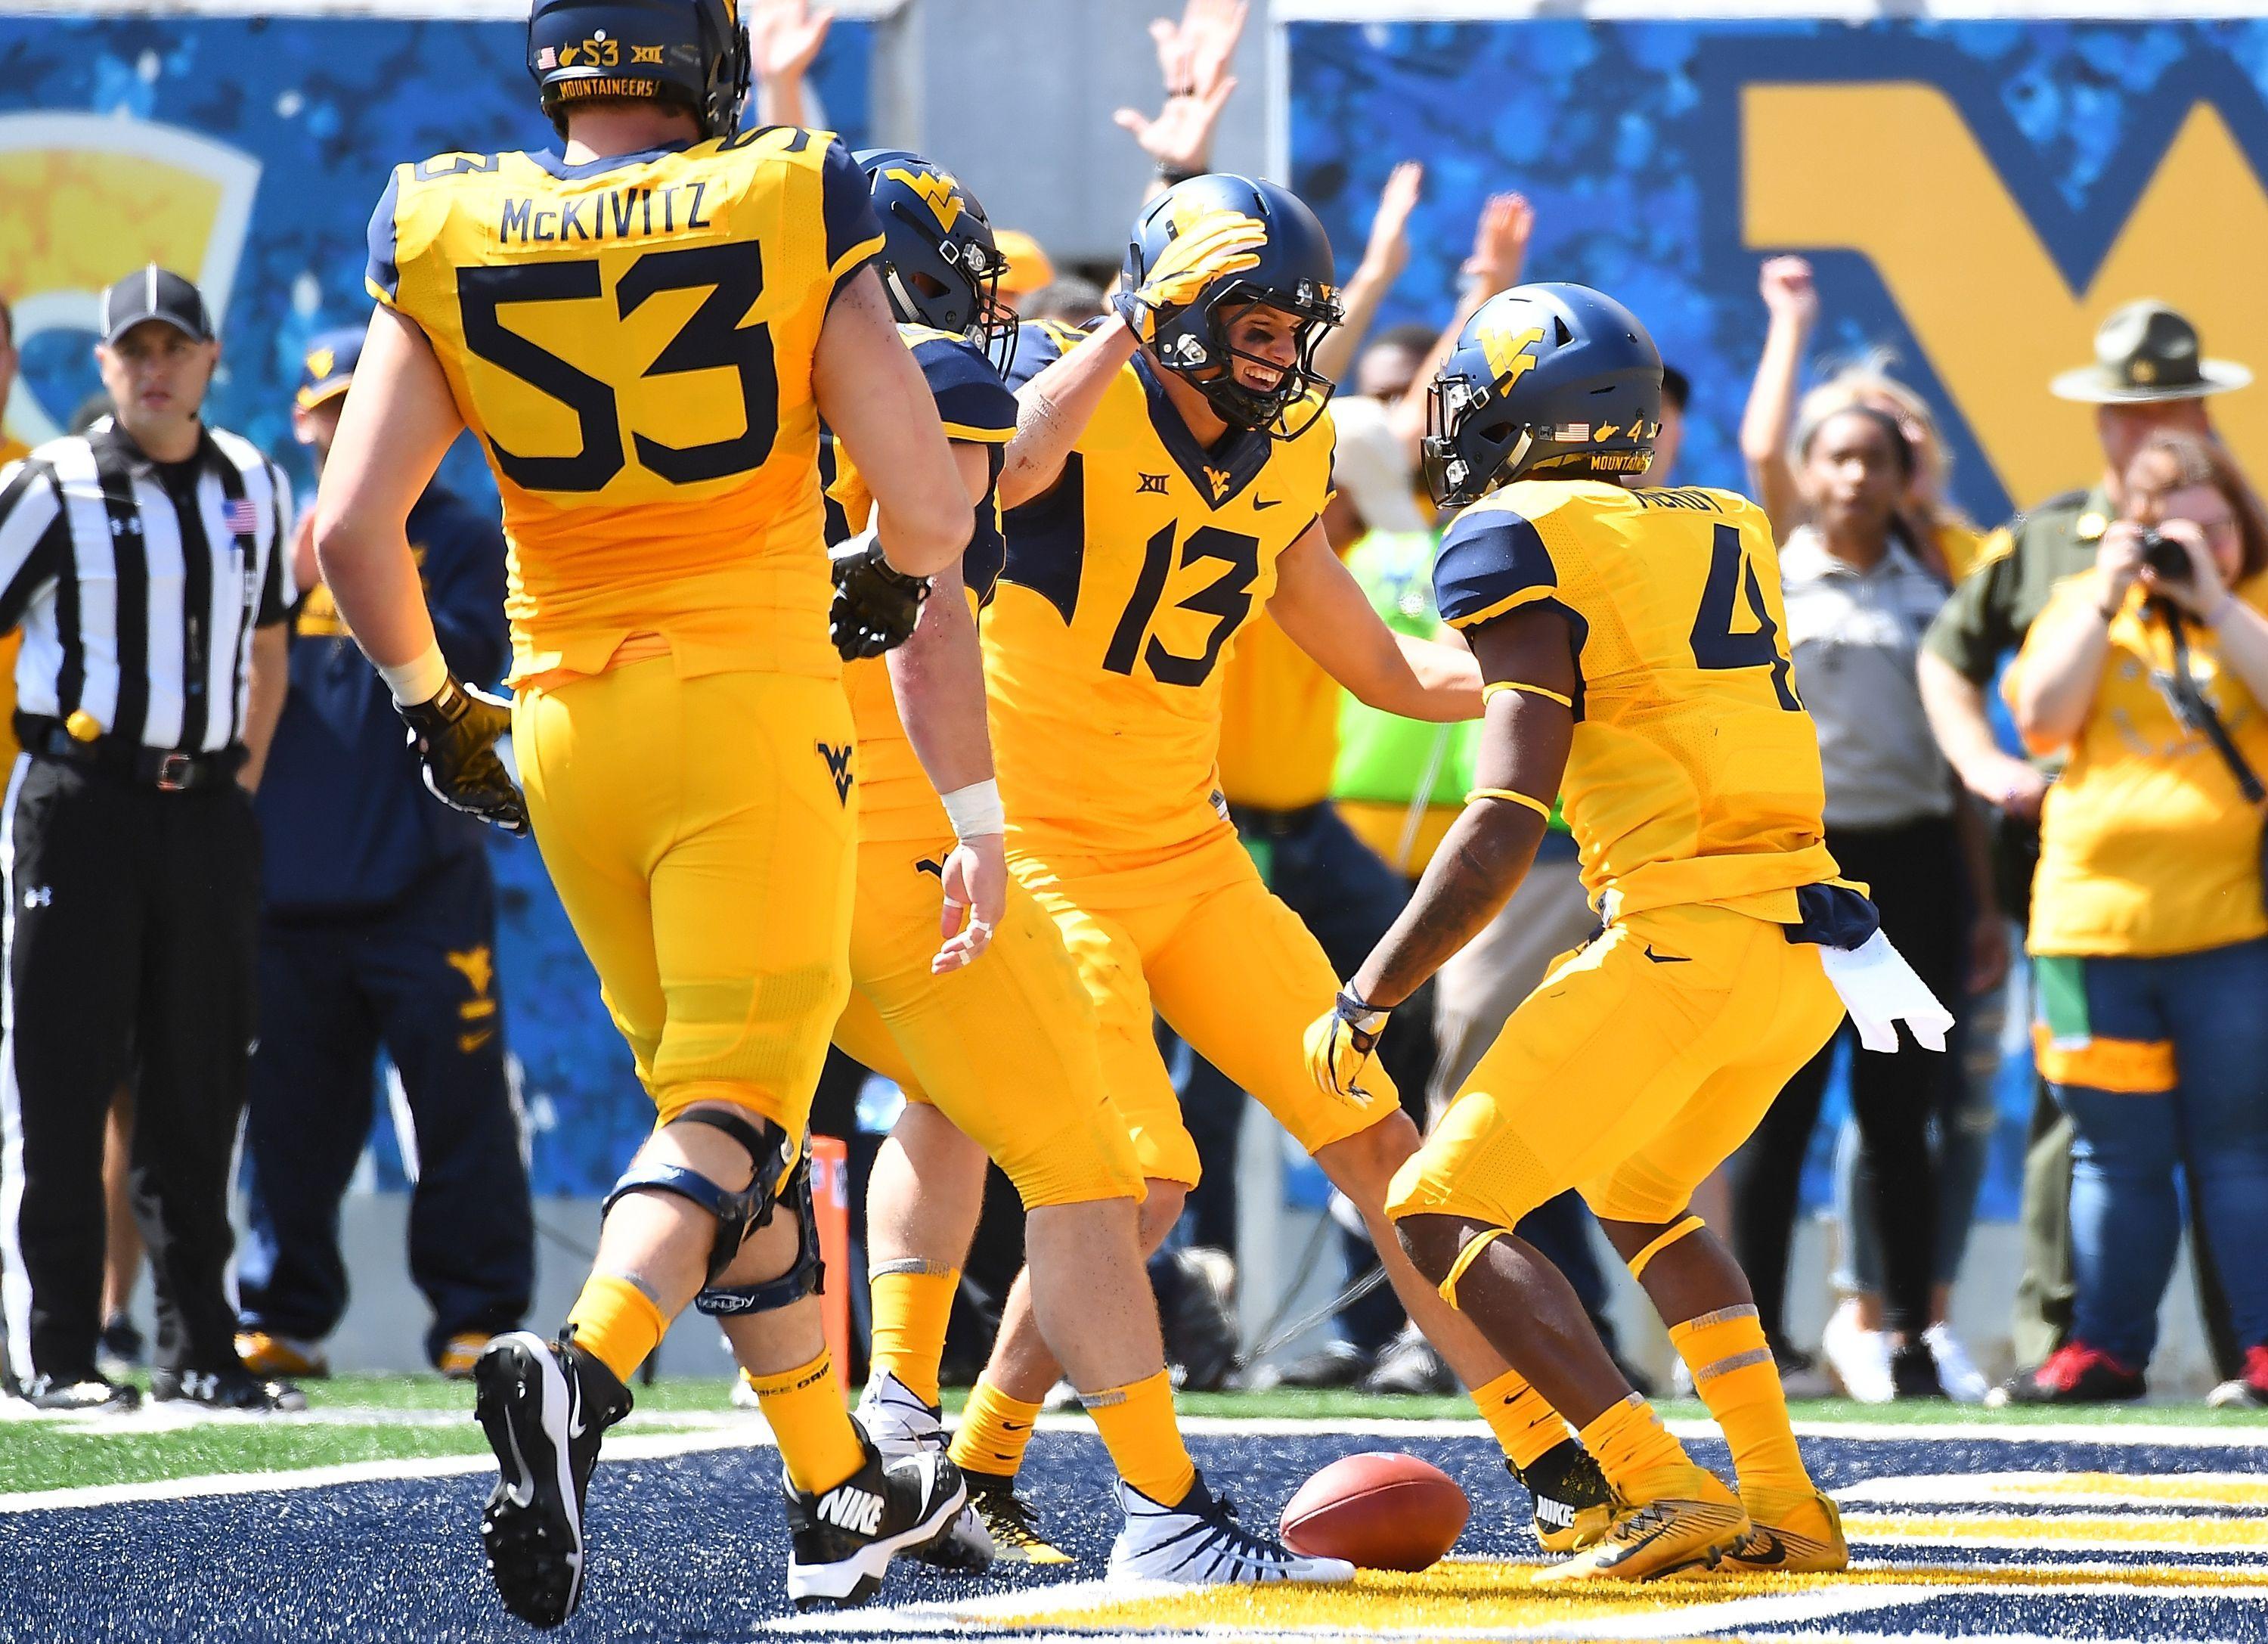 West Virginia Football: 3 Mountaineers that could go in first round